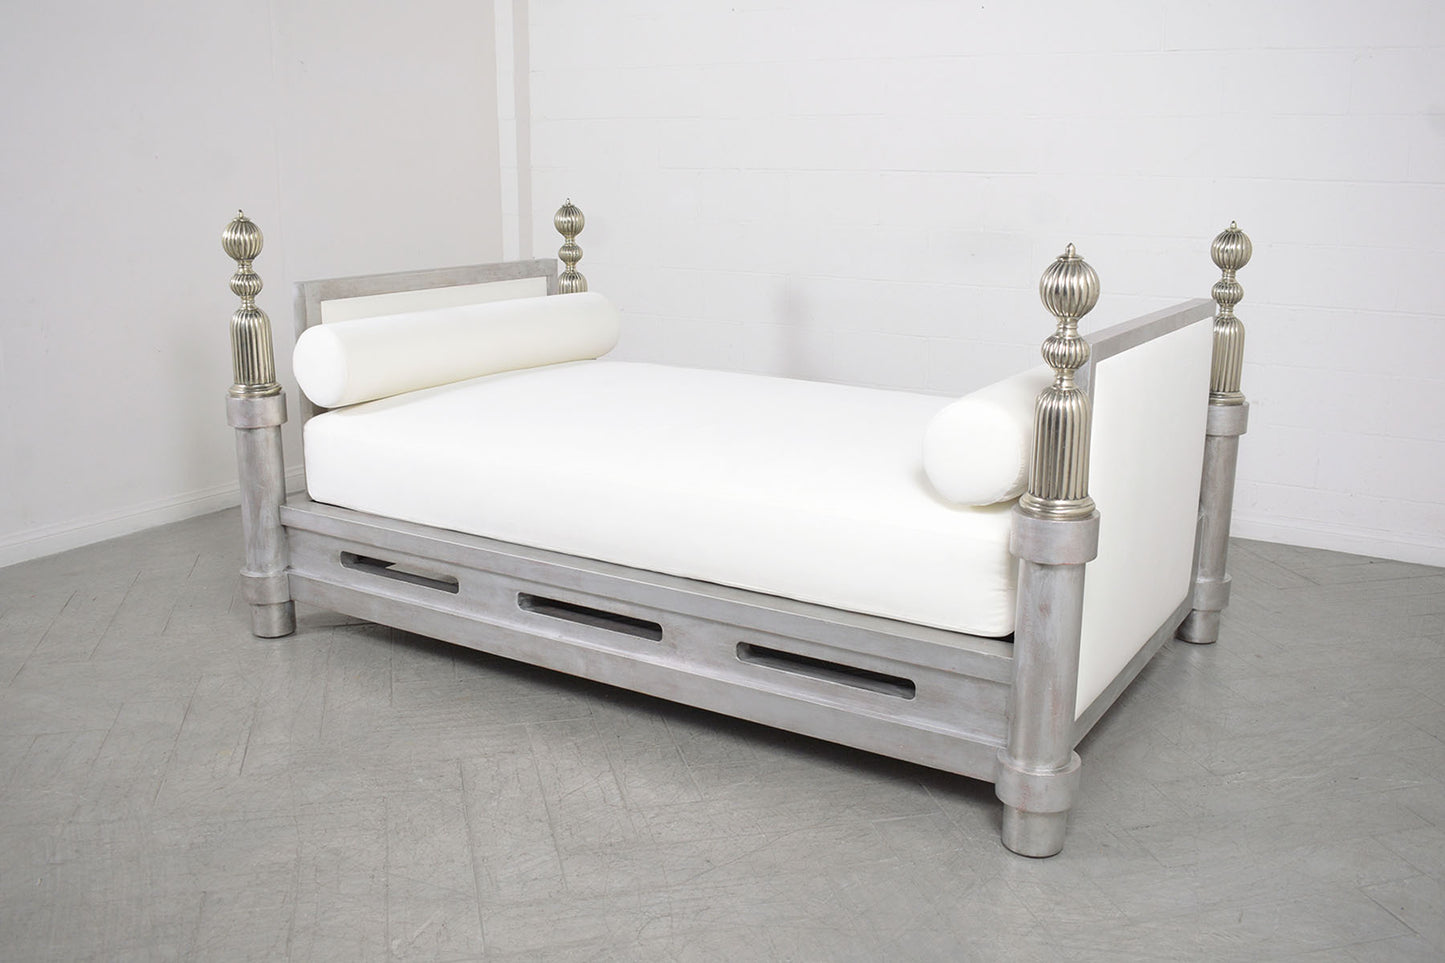 Hand-Crafted Regency-Style Daybed: Vintage Elegance & Contemporary Aesthetics